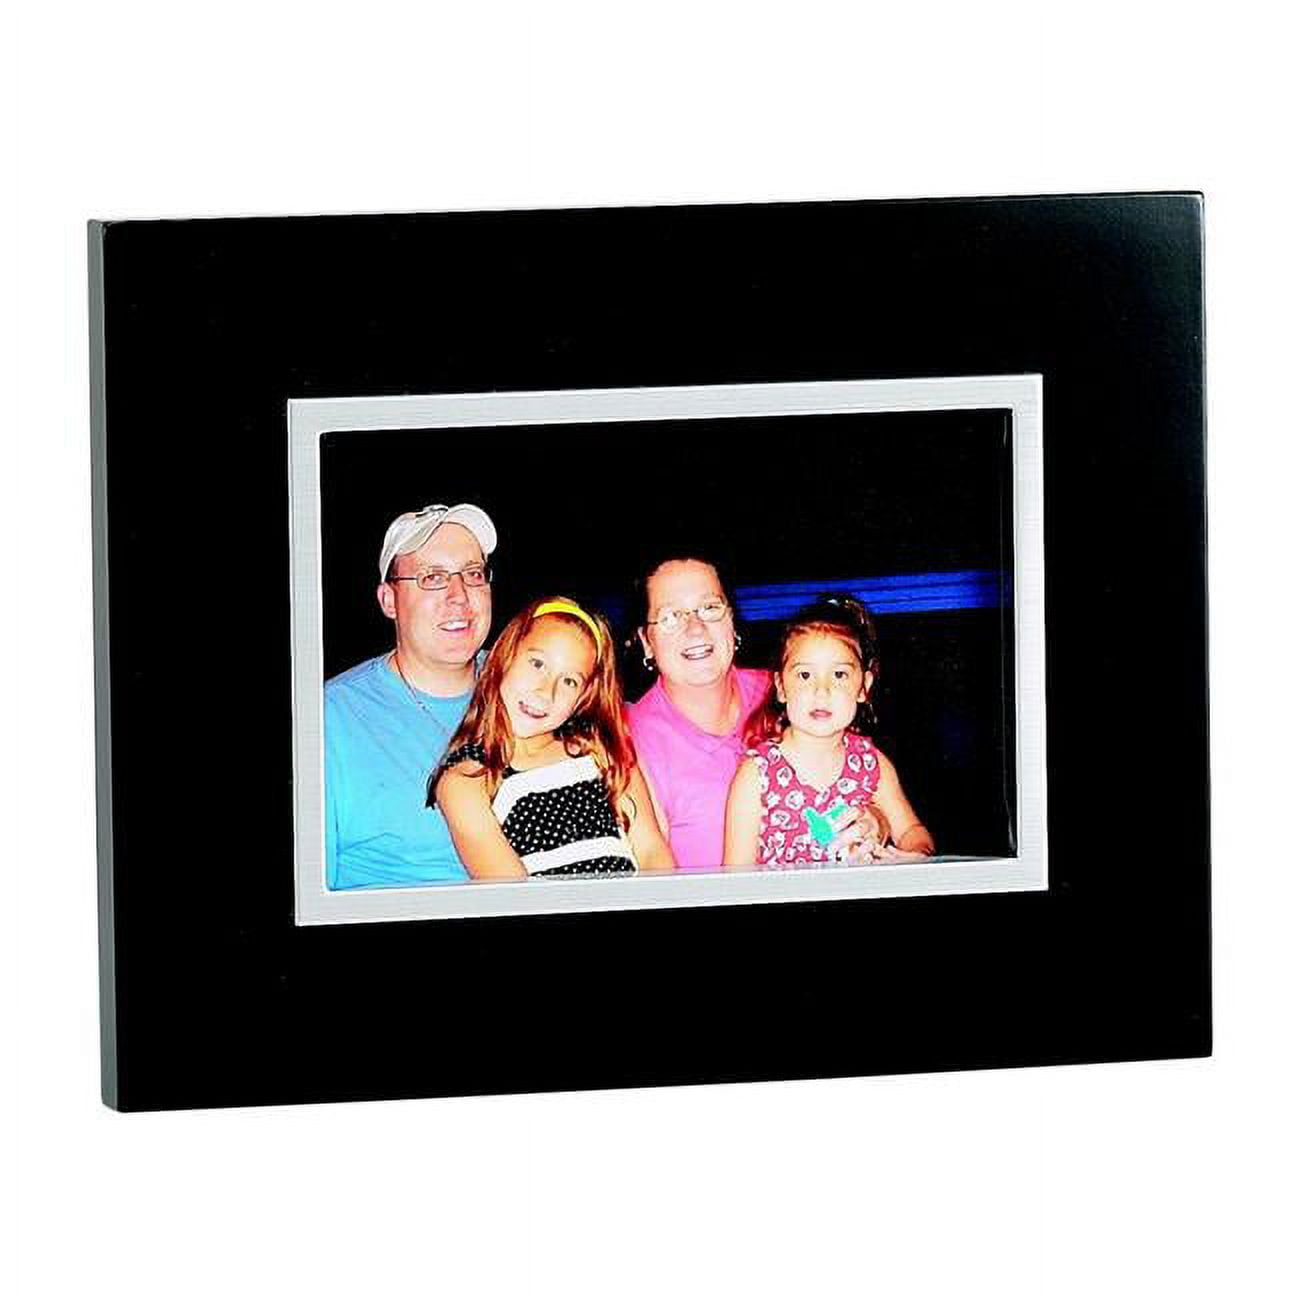 069355 4 X 6 In. Ebony Photo Frame With Silver Inner Trim Holds, Black